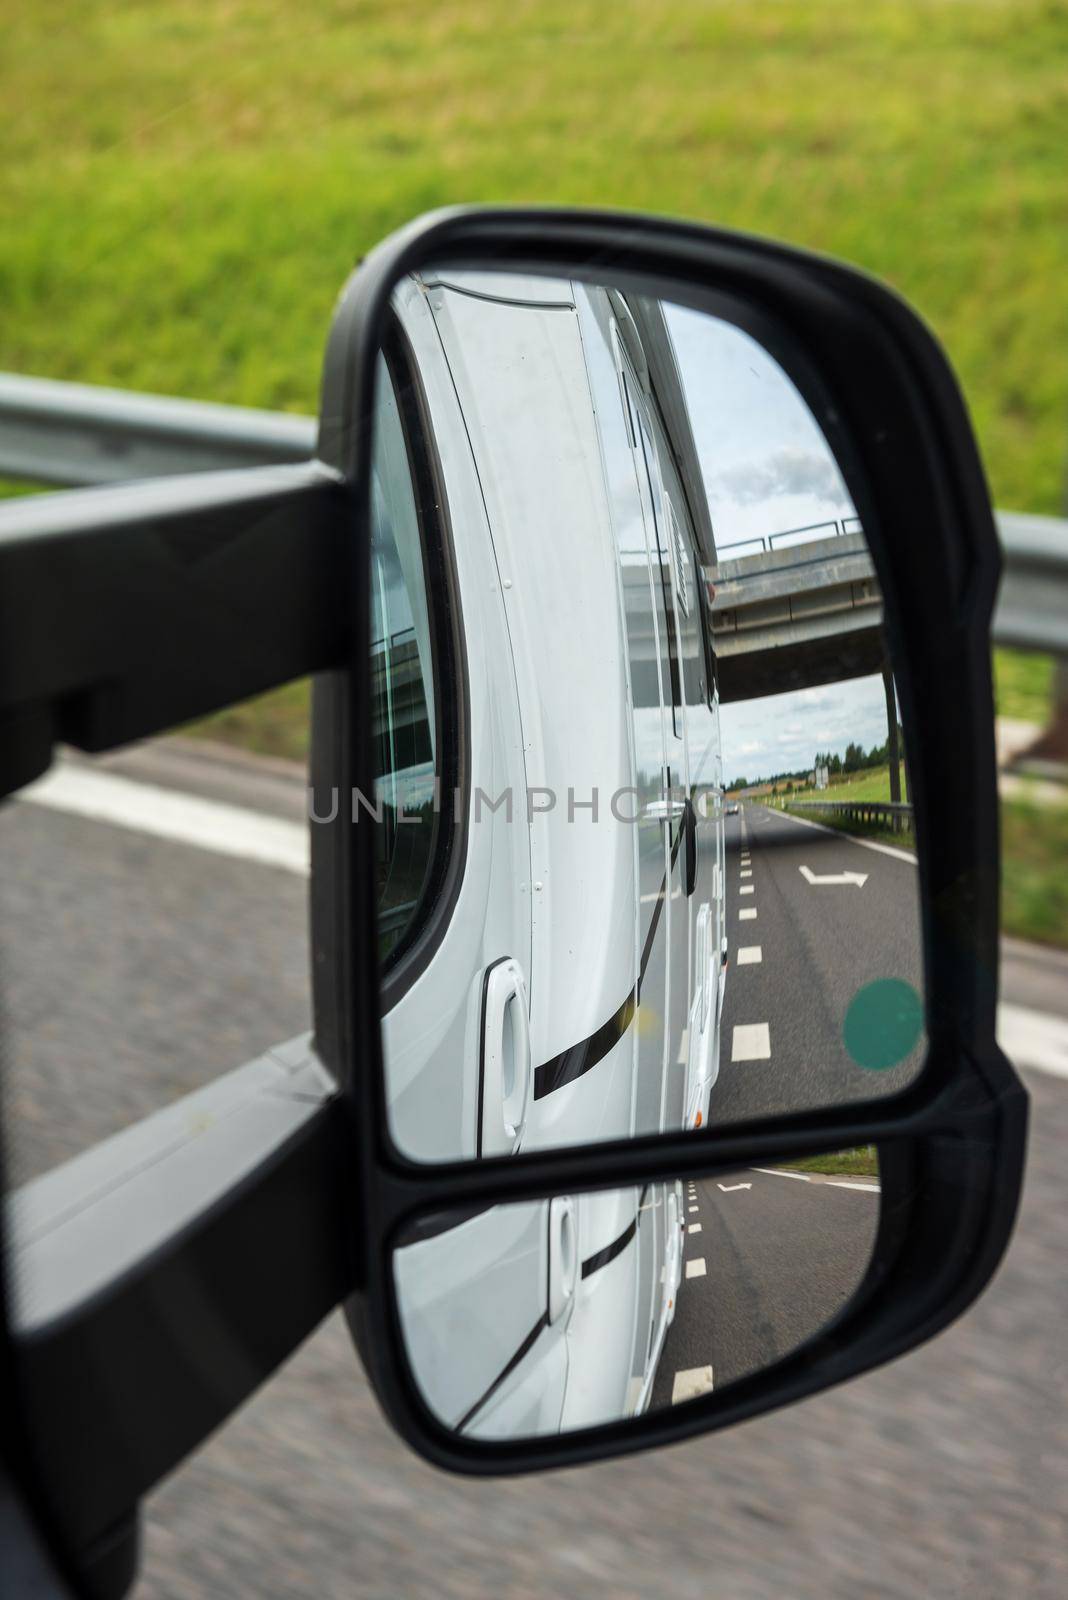 Road view from the side mirror. Traveling by car by anytka